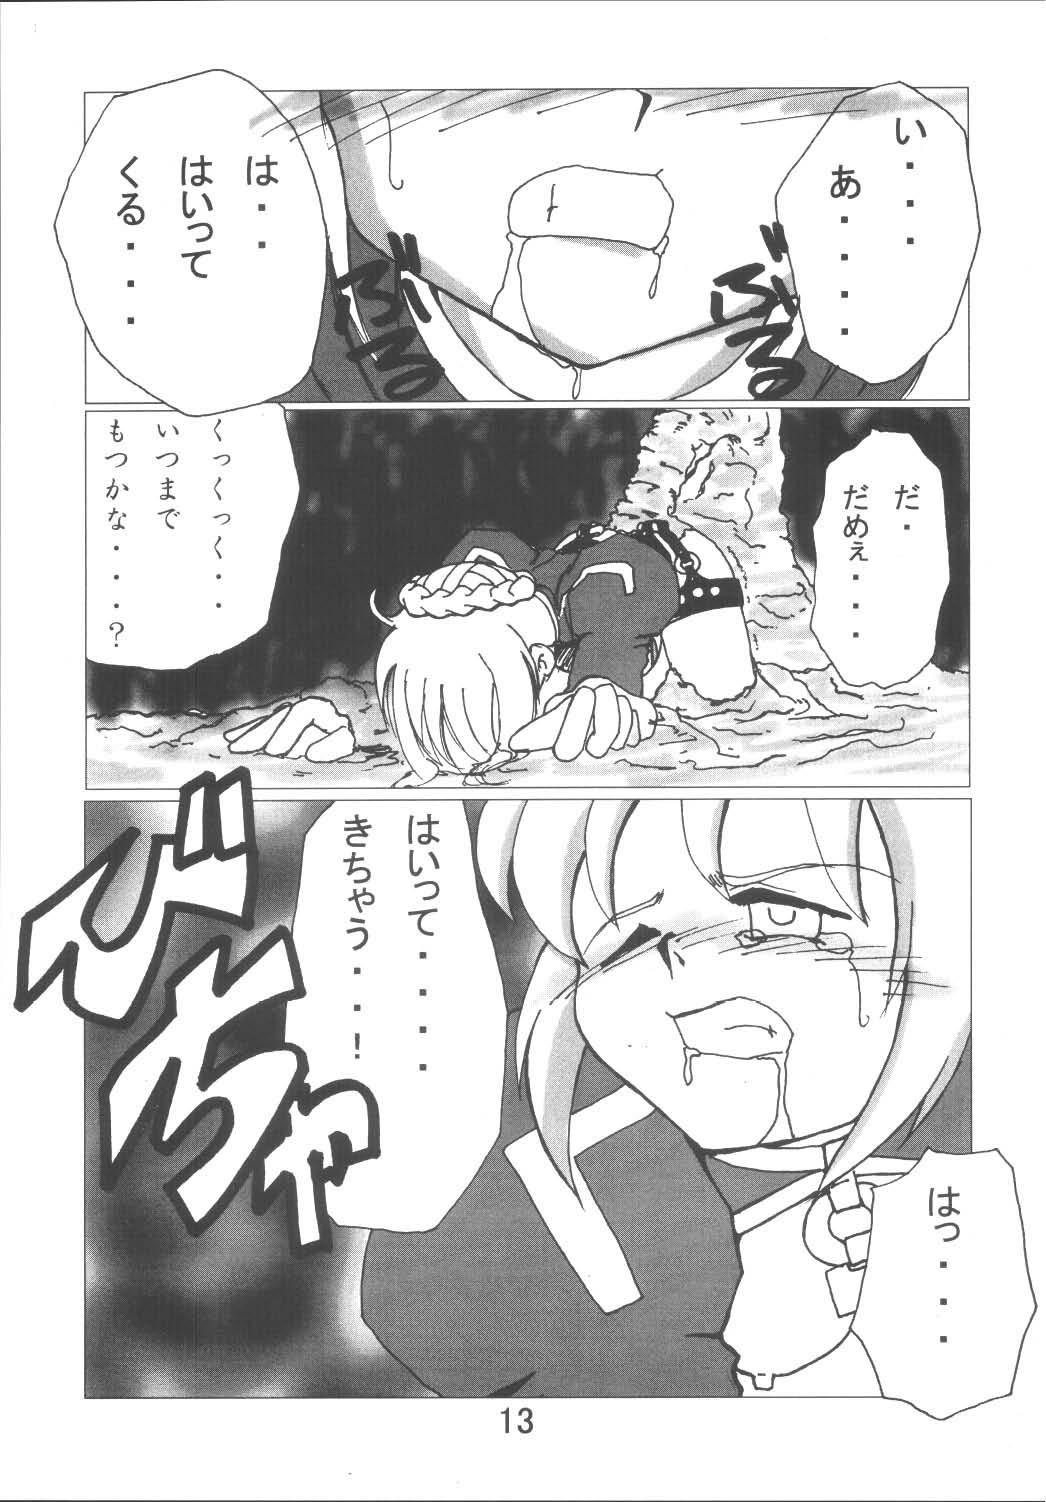 Behind Fate Nightmare For Saber - Fate stay night Internal - Page 13